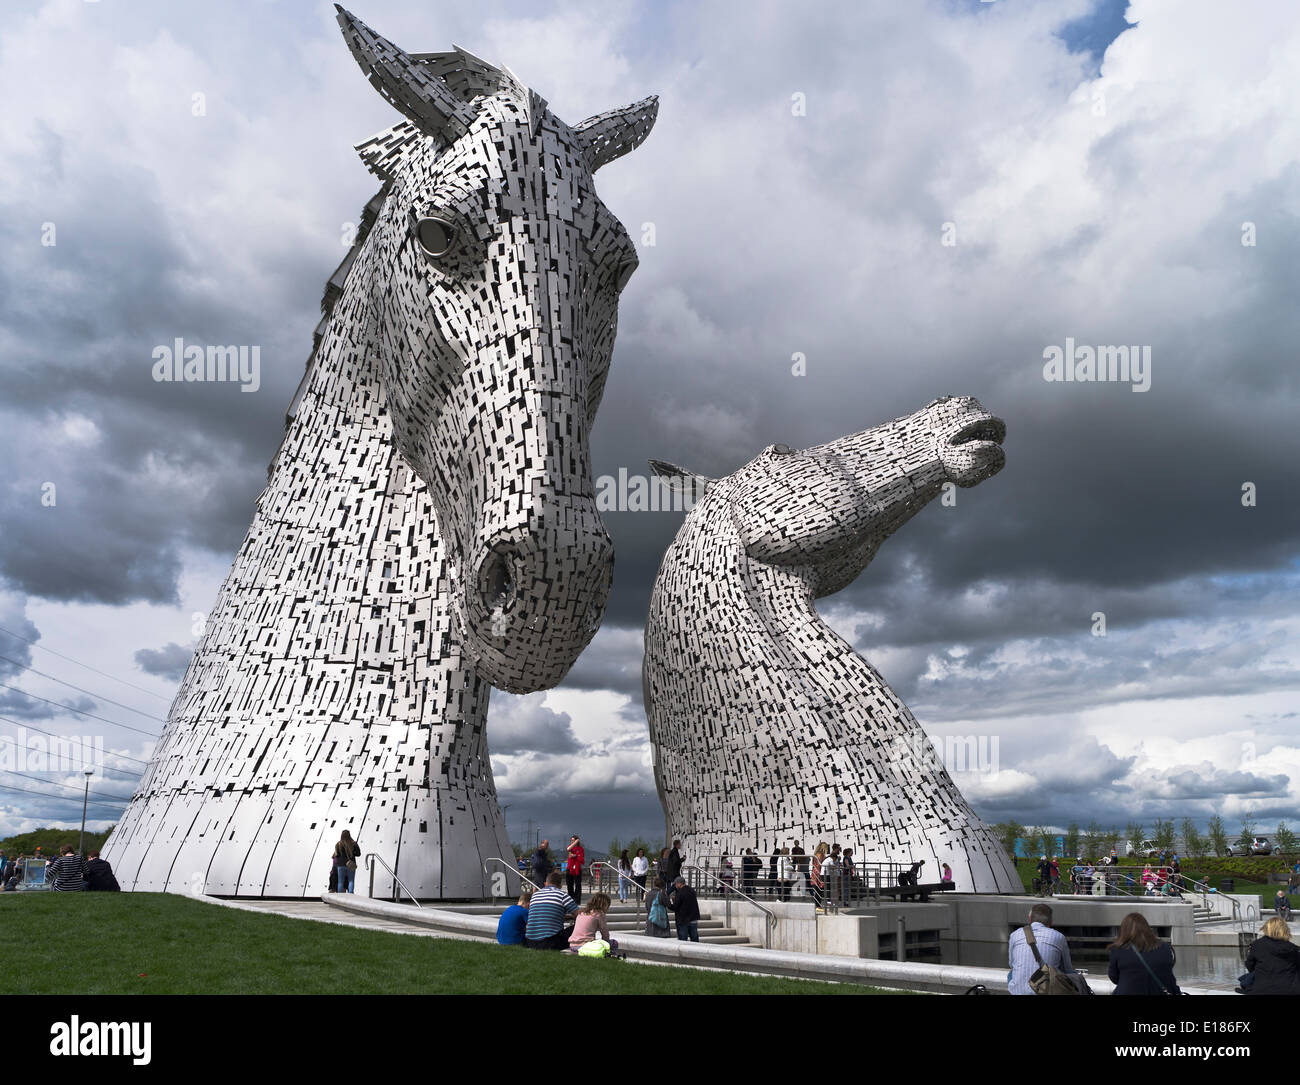 dh Helix Park FALKIRK STIRLINGSHIRE Kelpies statues The Helix Monuments to Horse power sculpture by Andy Scott Stock Photo